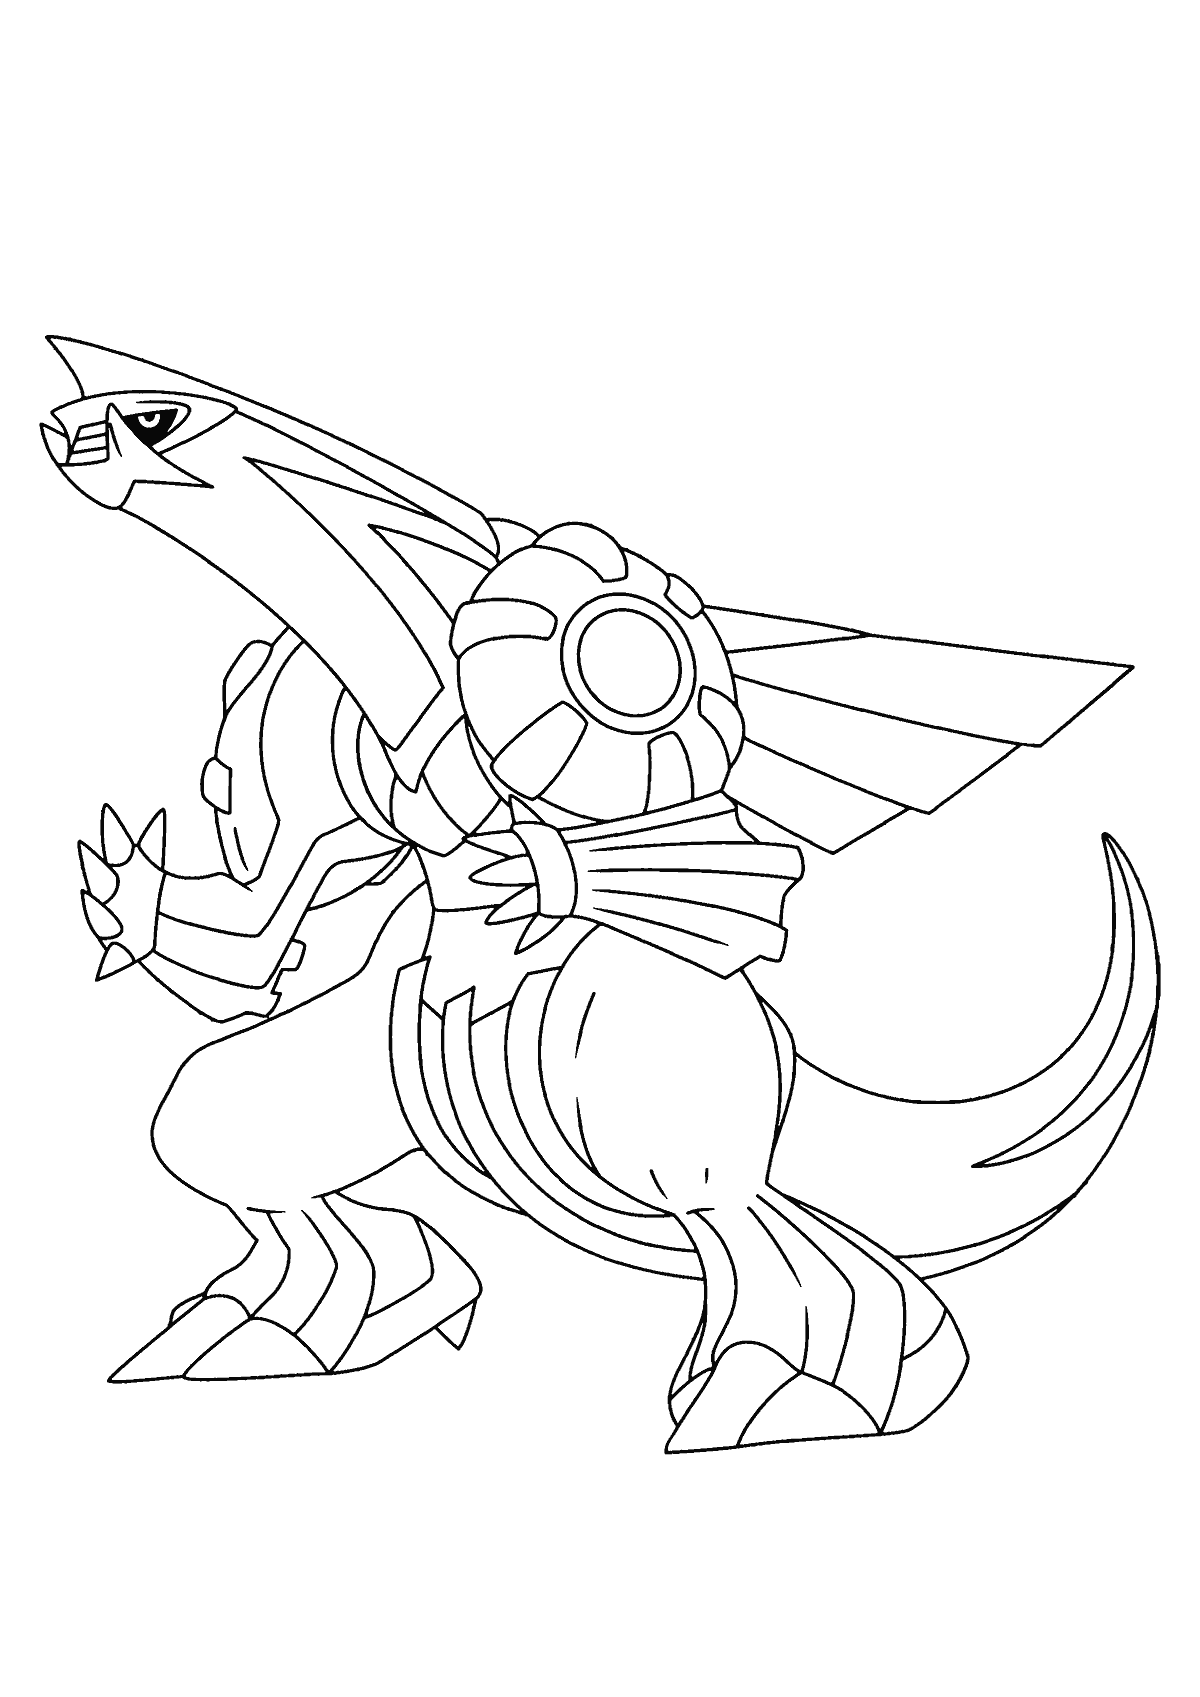 coloring page: Legendary Pokémon Palkia has majestic long neck & tail, deep blue body w/ light blue spots, white underbelly, red jewel on forehead, black horns, blue eyes, 4 white fins, & long blue tail.